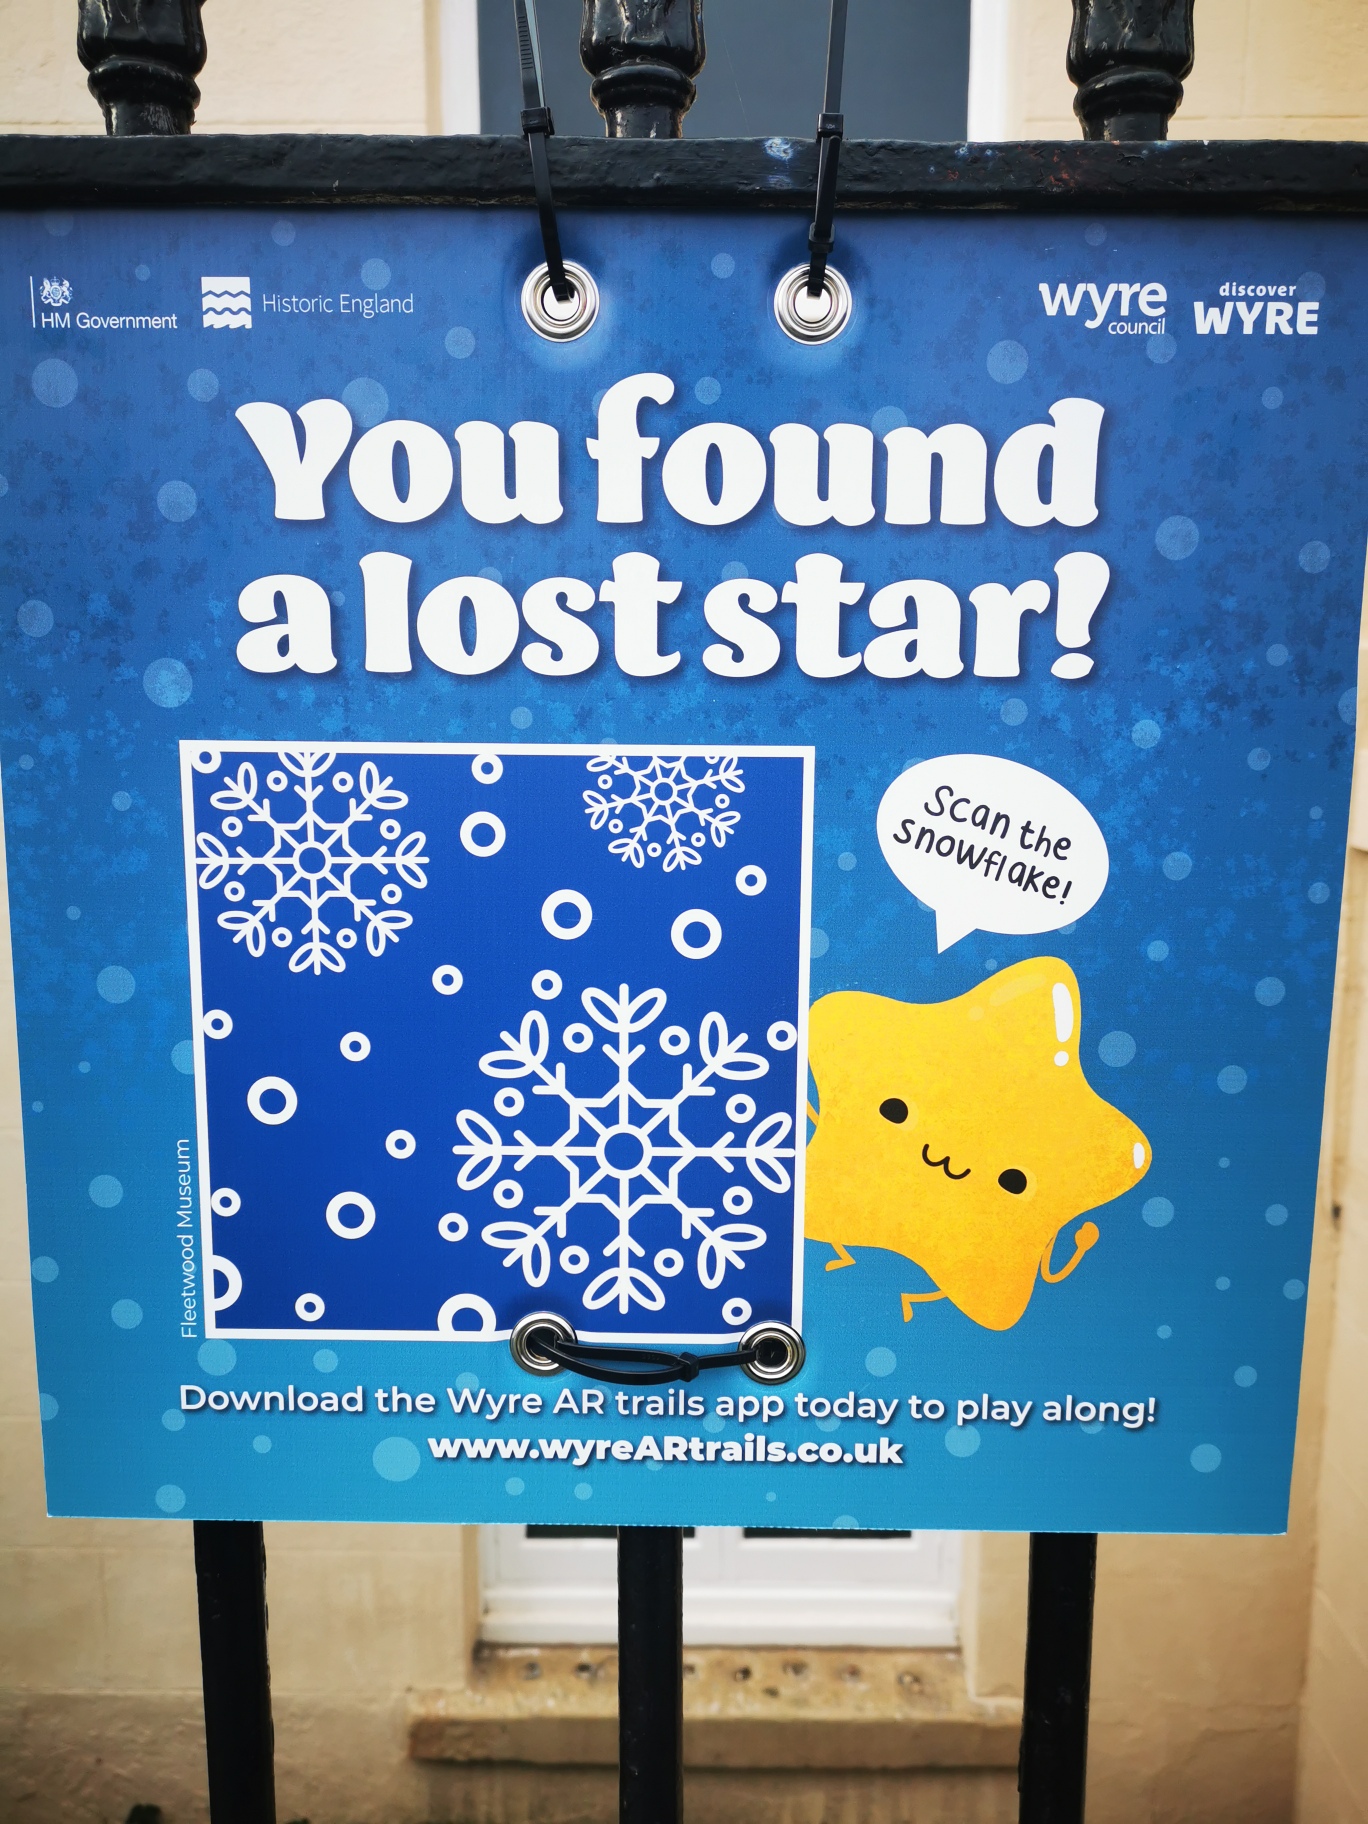 Poster with text &#039;You found a lost star!&#039;. A cartoon star asks people to &#039;Scan the snowflake!&#039;. Users need to Download the Wyre AR trails app today to play along! www.wyreARtrails.co.uk